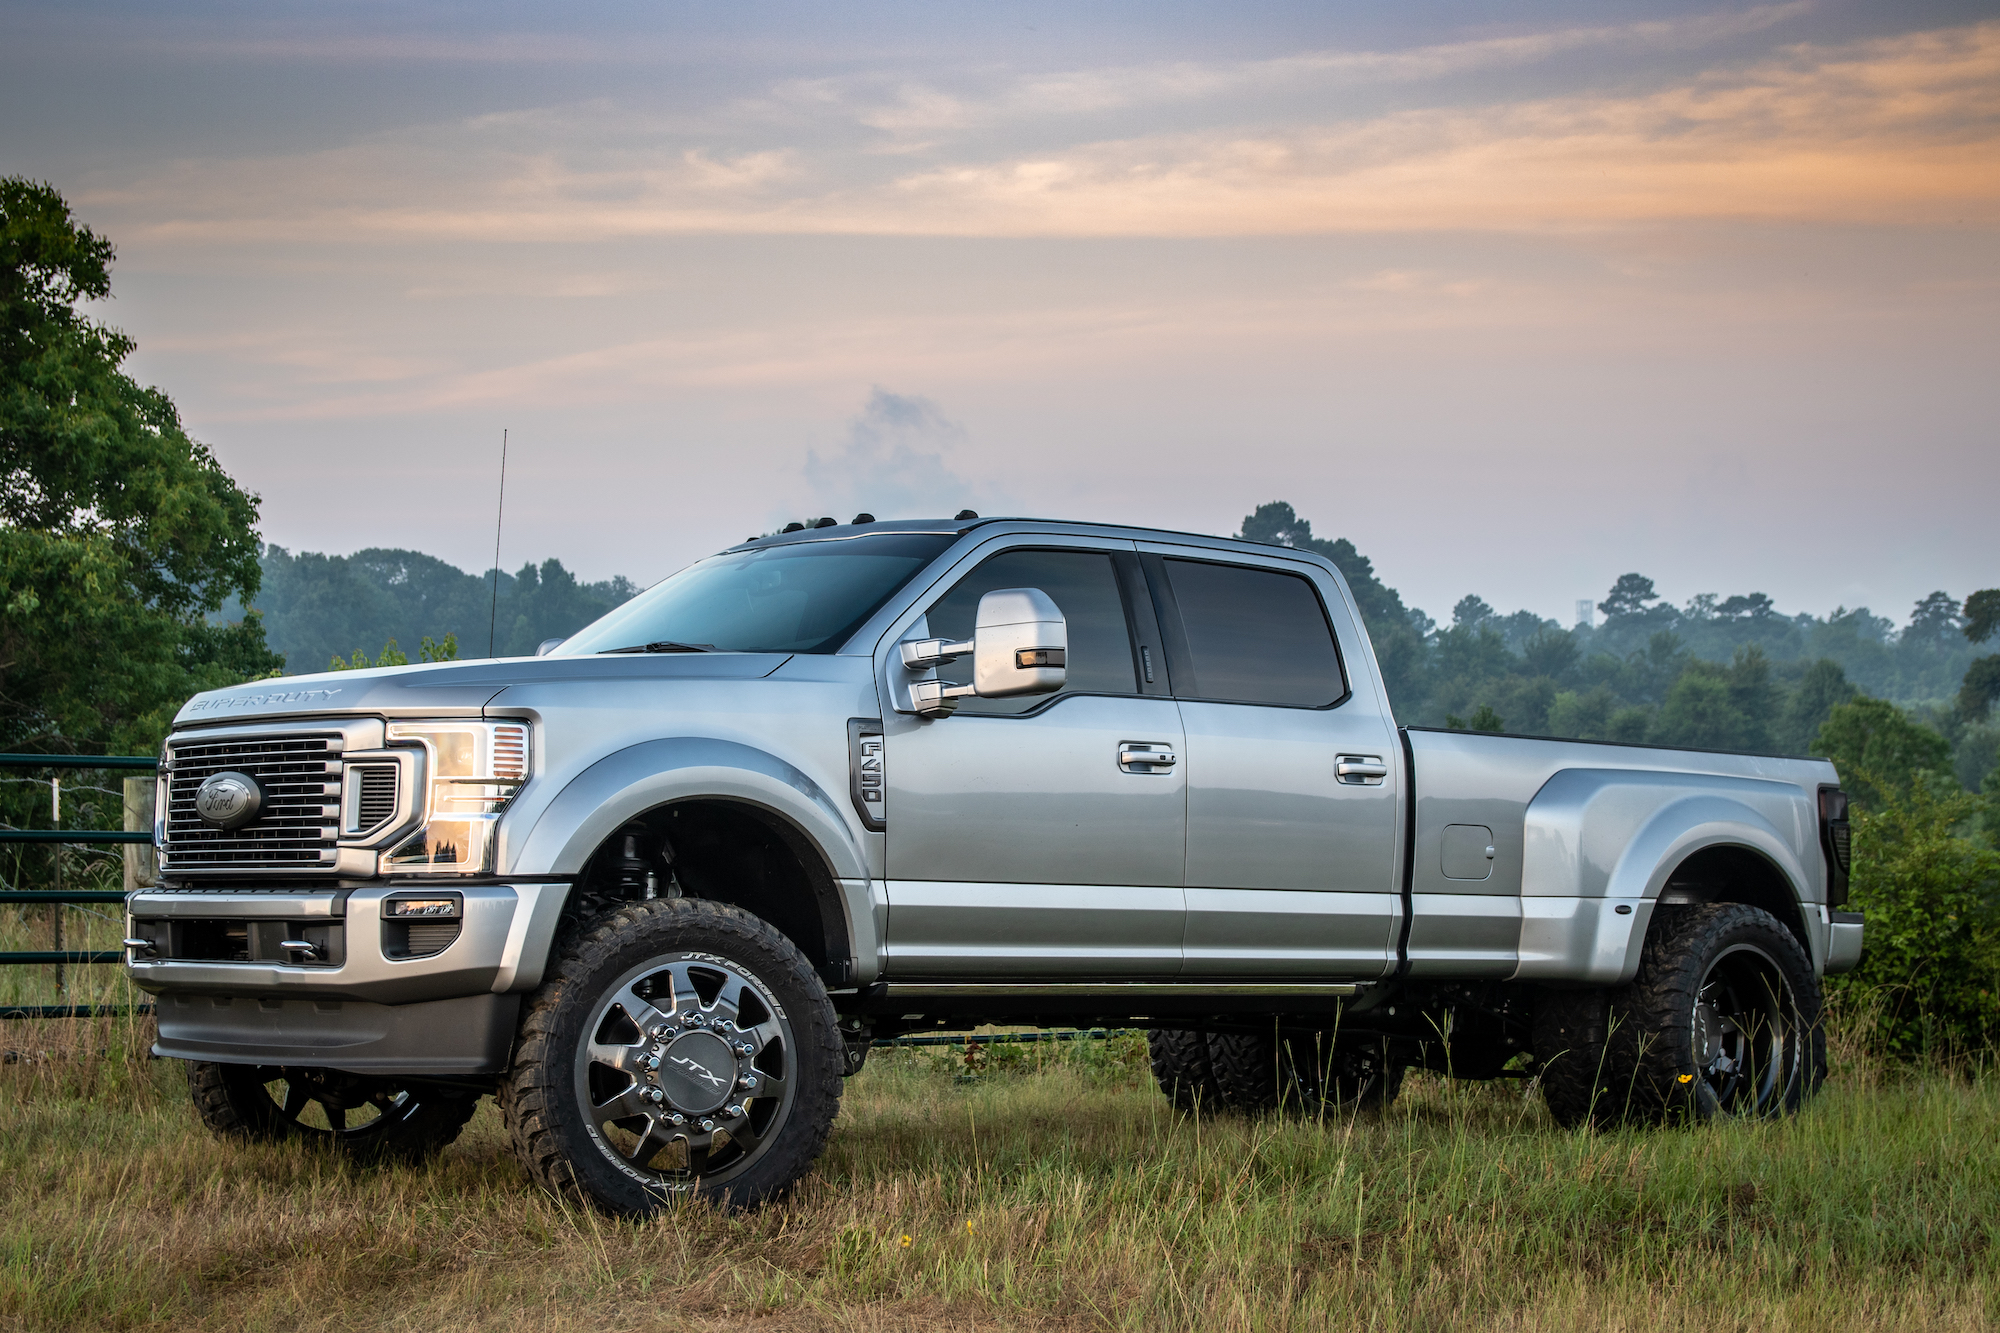 2020 Ford F-450 Platinum Dually on 24-inch JTX Forged Wheels - JTX Forged